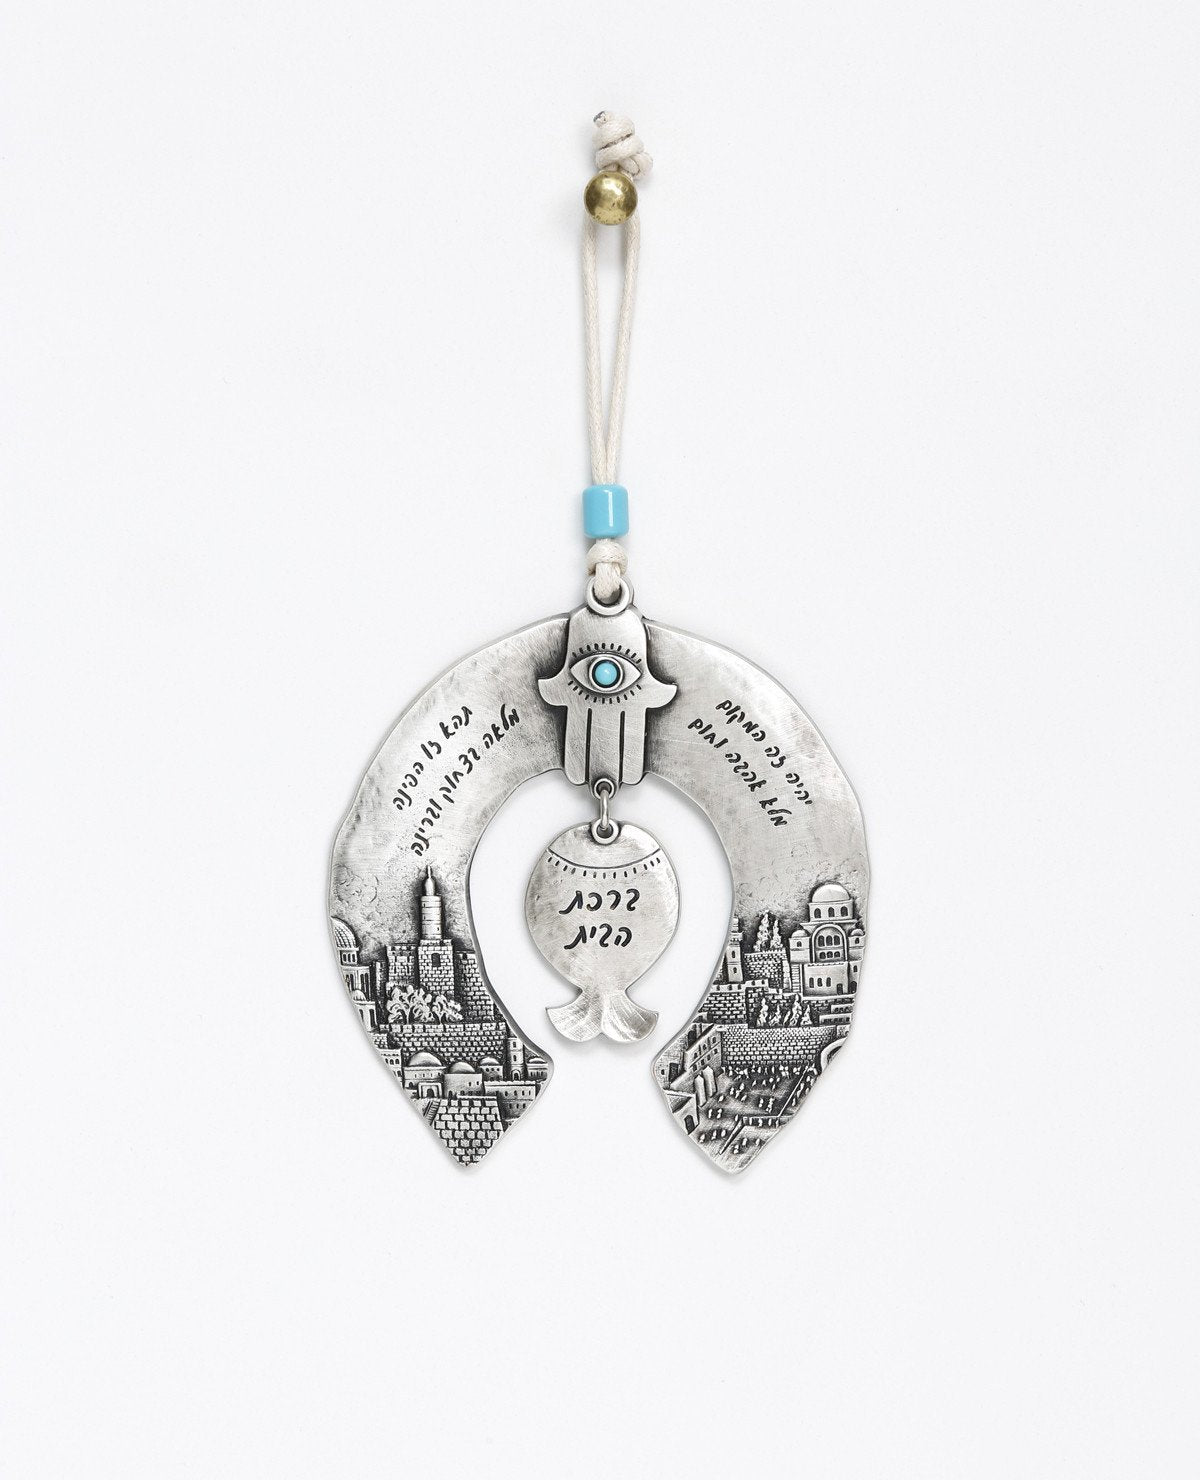 A unique and originally designed hanging Home Blessing ornament in the shape of a horseshoe. The horseshoe is embedded with an embossed image of Jerusalem on both sides. A pomegranate hangs from the center, with a Hamsa on top of it inlaid with a turquoise colored Swarovski crystal. The ornament is coated in sterling silver and decorated with words of blessing, love and light. Comes with a natural colored faux leather string decorated with a turquoise colored bead. Makes a great housewarming gift or an orig